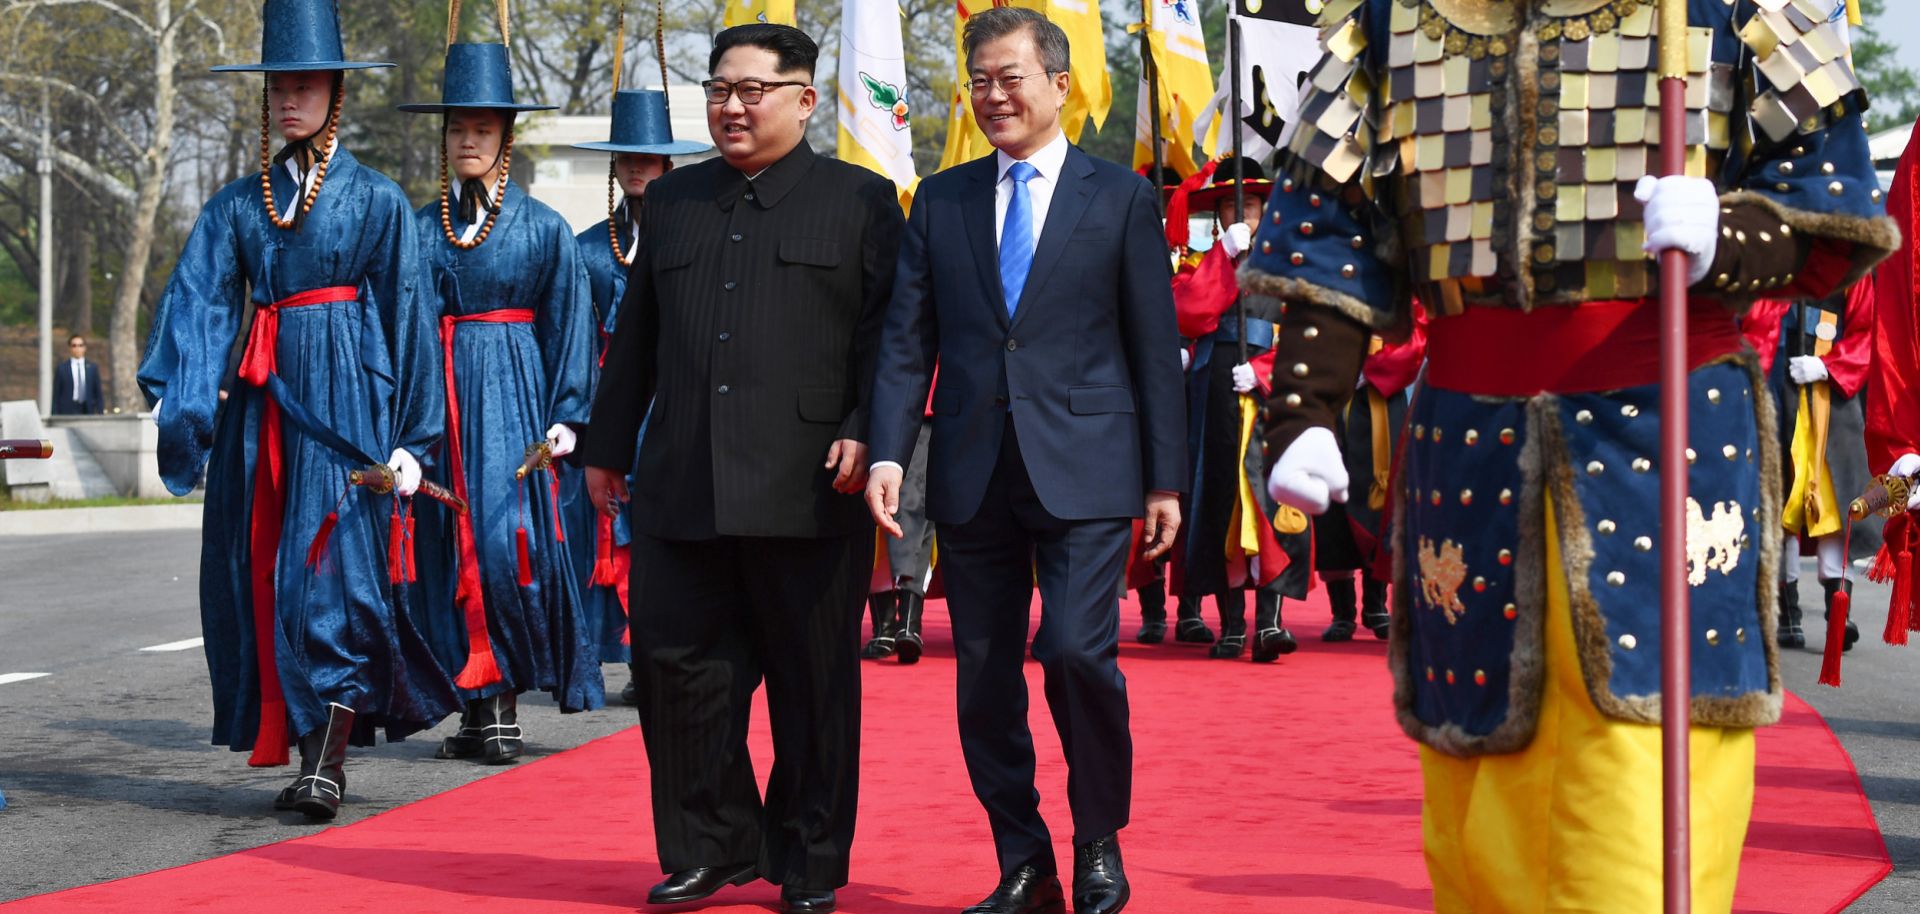 In this photograph, North Korean leader Kim Jong Un, left, and South Korean President Moon Jae In walk together on April 27, 2018, after meeting in Panmunjom for the first inter-Korean summit since 2007.